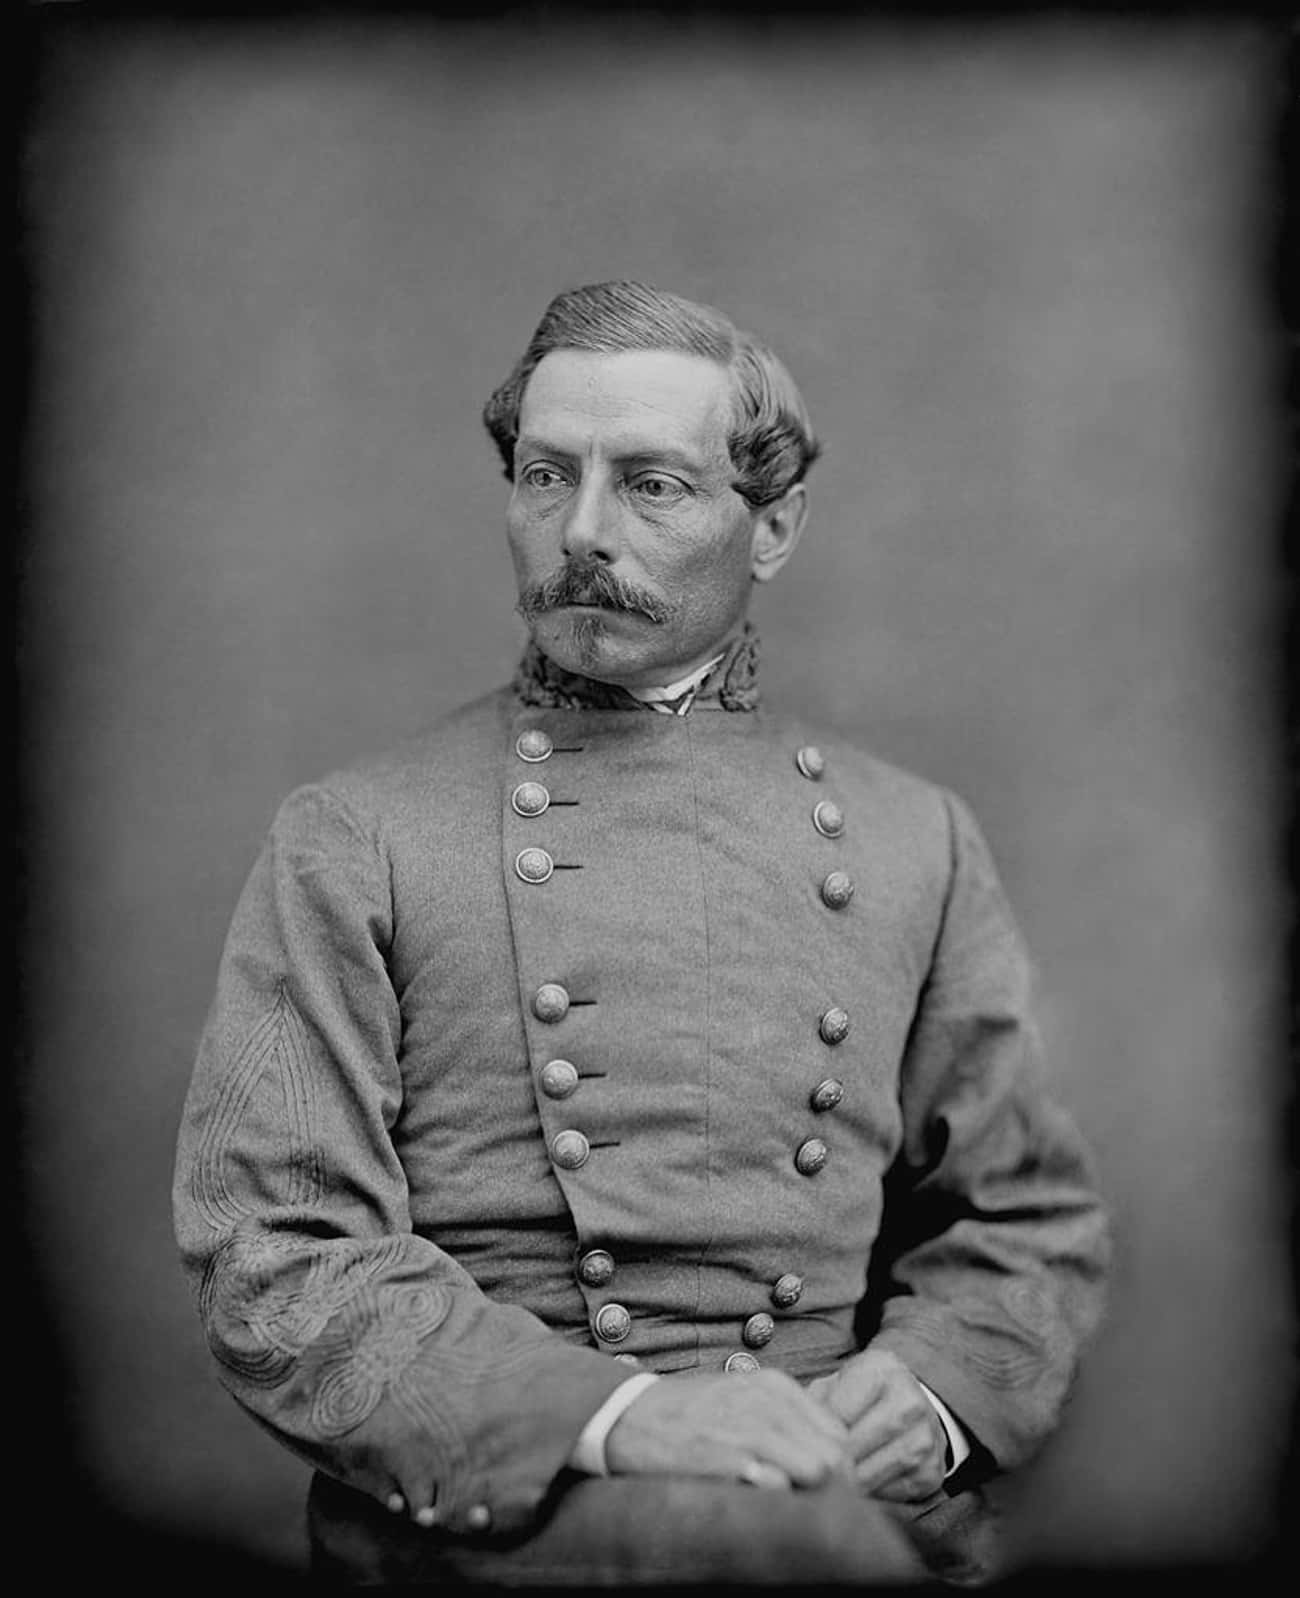 After The War, Prominent Confederate General P.G.T. Beauregard Advocated For Black Civil Rights And Suffrage